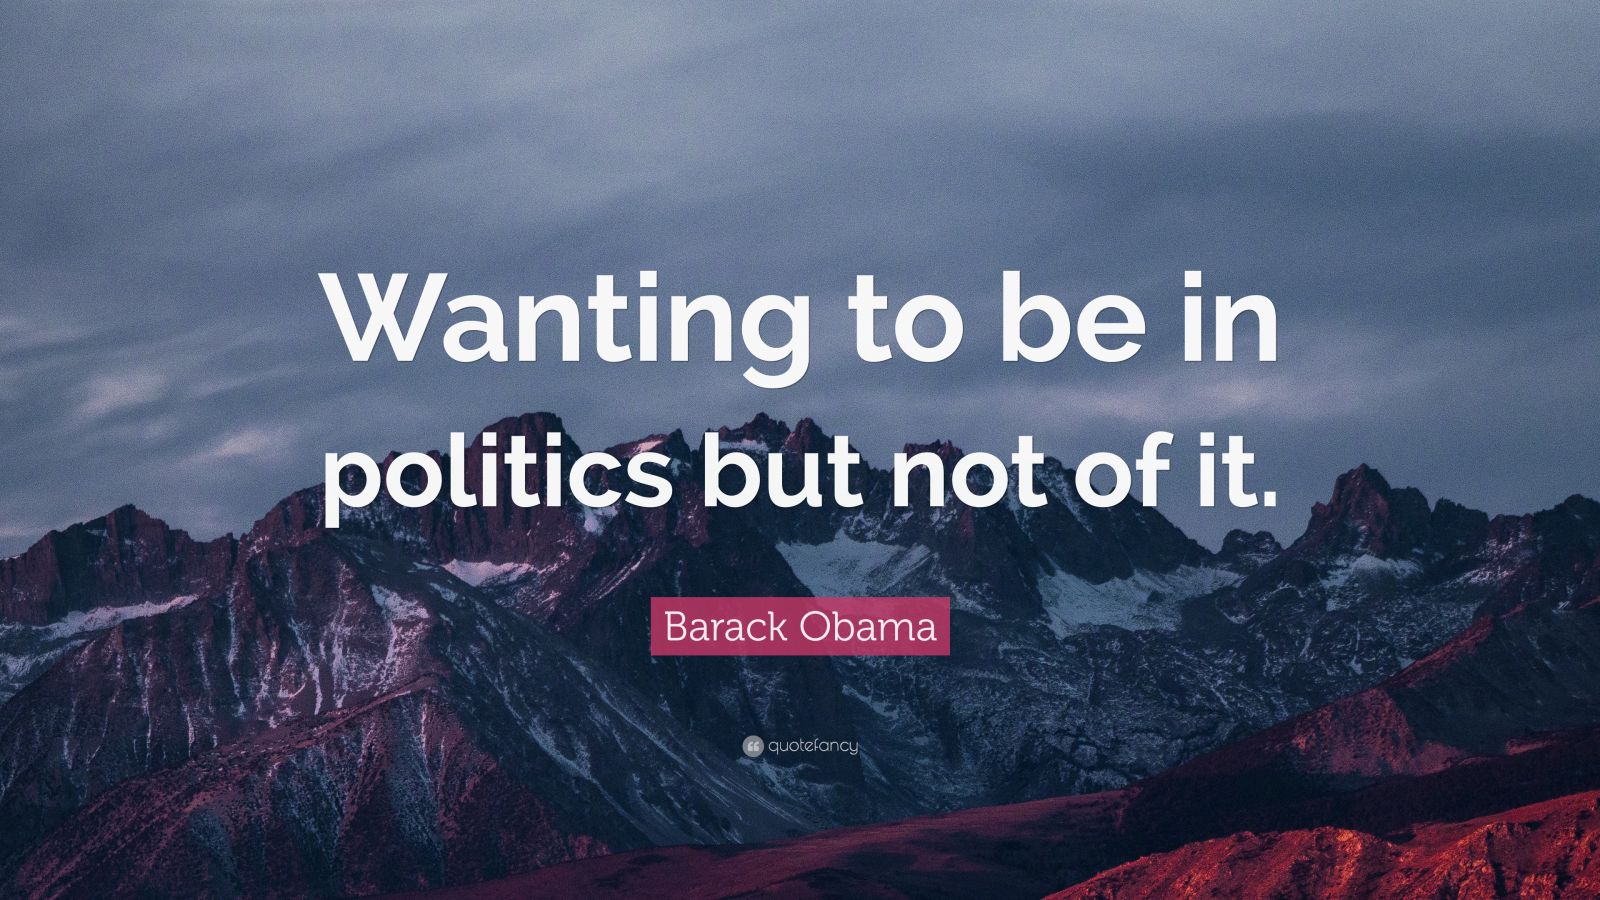 Barack Obama Quote: “Wanting to be in politics but not of it.”